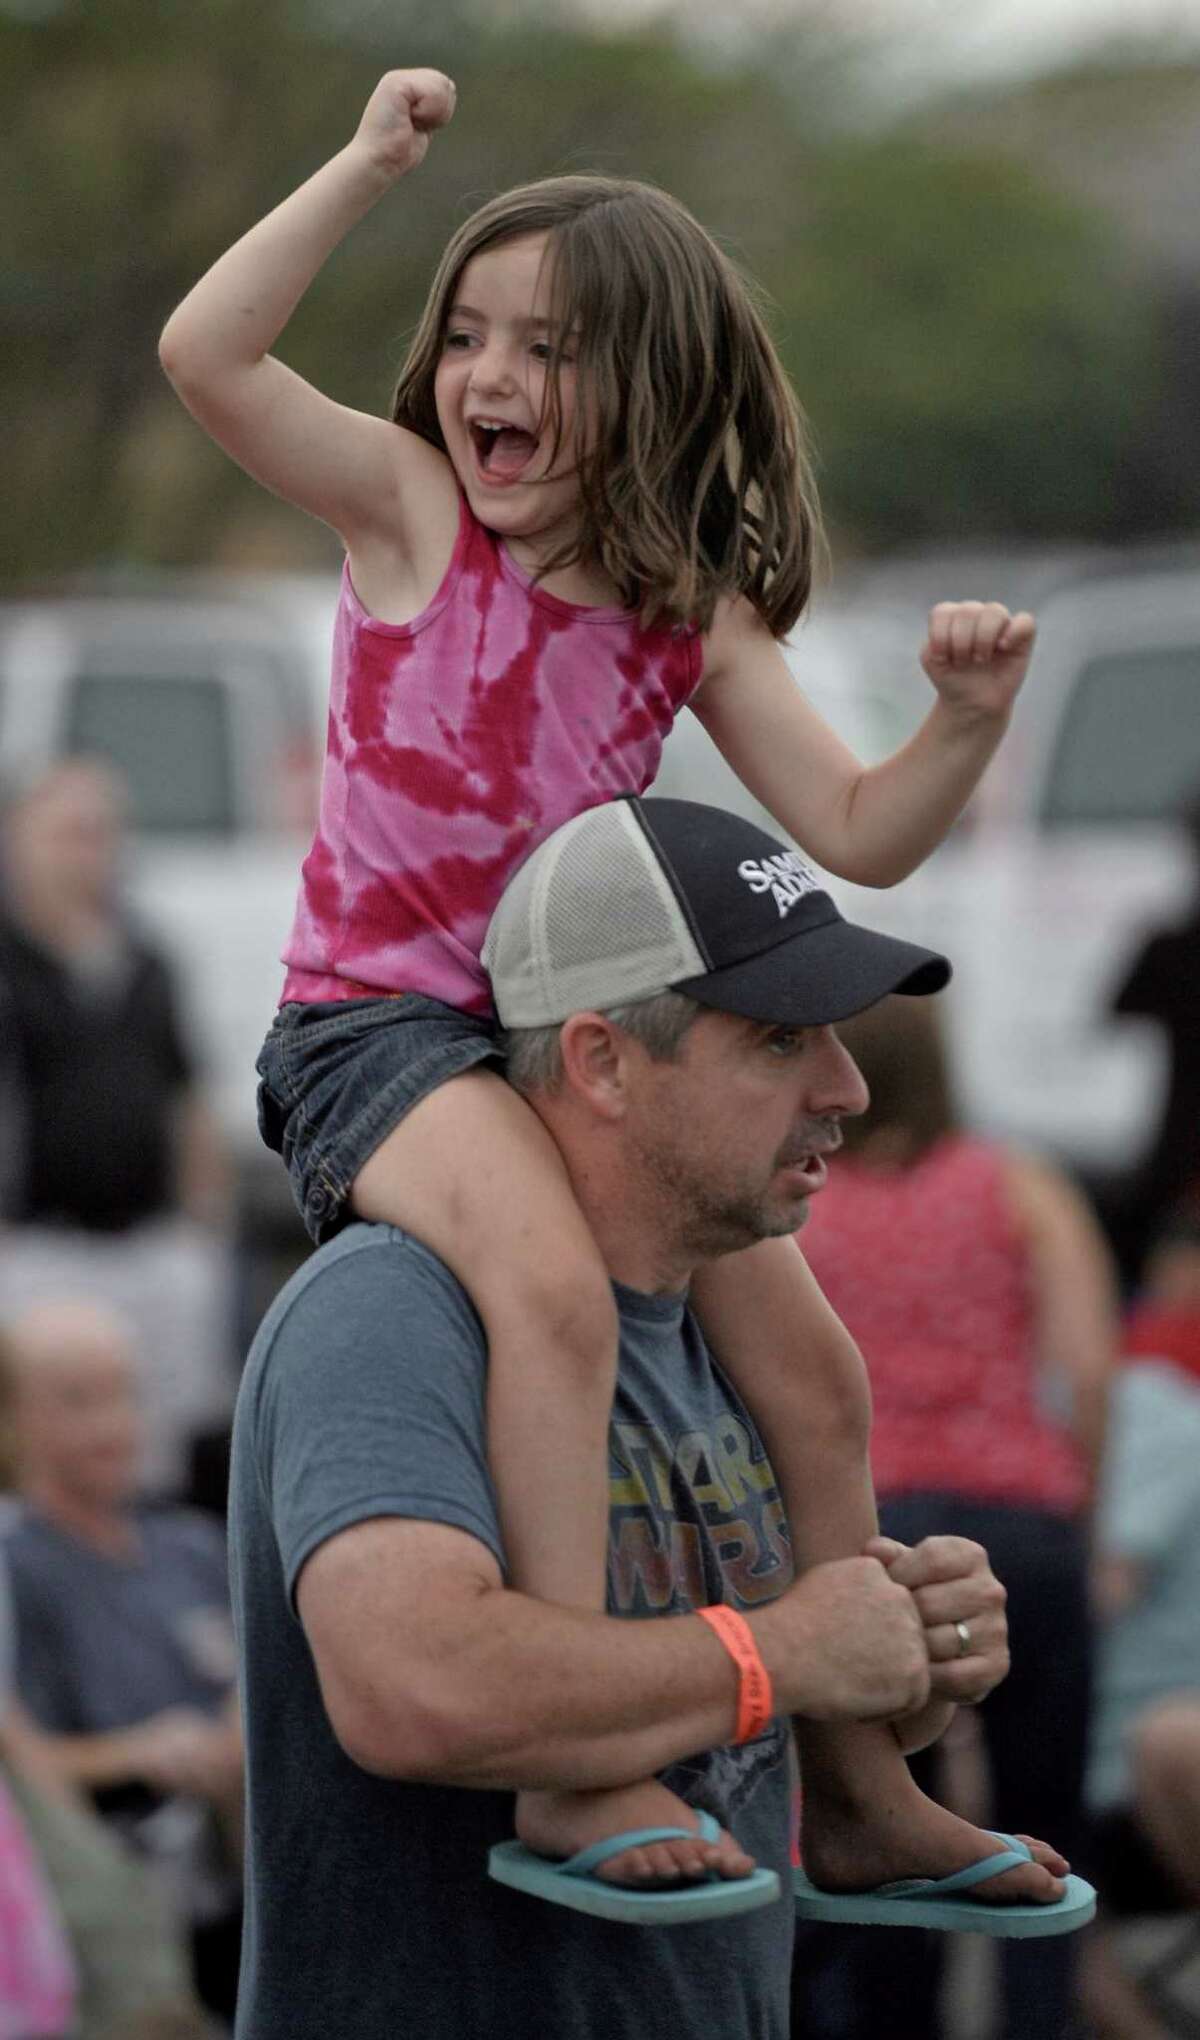 Molly Carey, 5, of Danbury, dances up a storm with her dad, Make Carey, to the song "Sweet Caroline" before the fireworks at the Danbury Fair Mall, on Thursday night, July 2 2015, in Danbury, Conn.